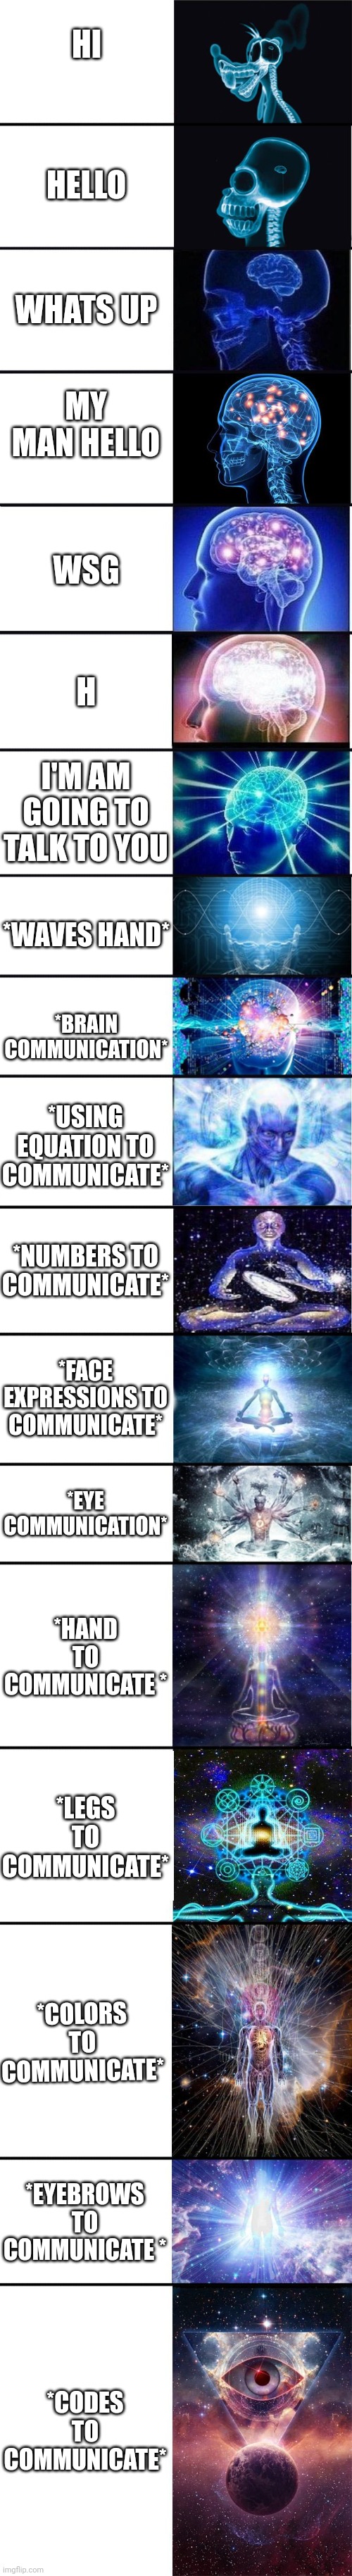 expanding brain: 9001 | HI; HELLO; WHATS UP; MY MAN HELLO; WSG; H; I'M AM GOING TO TALK TO YOU; *WAVES HAND*; *BRAIN COMMUNICATION*; *USING EQUATION TO COMMUNICATE*; *NUMBERS TO COMMUNICATE*; *FACE EXPRESSIONS TO COMMUNICATE*; *EYE COMMUNICATION*; *HAND TO COMMUNICATE *; *LEGS TO COMMUNICATE*; *COLORS TO COMMUNICATE*; *EYEBROWS TO COMMUNICATE *; *CODES TO COMMUNICATE* | image tagged in expanding brain 9001 | made w/ Imgflip meme maker